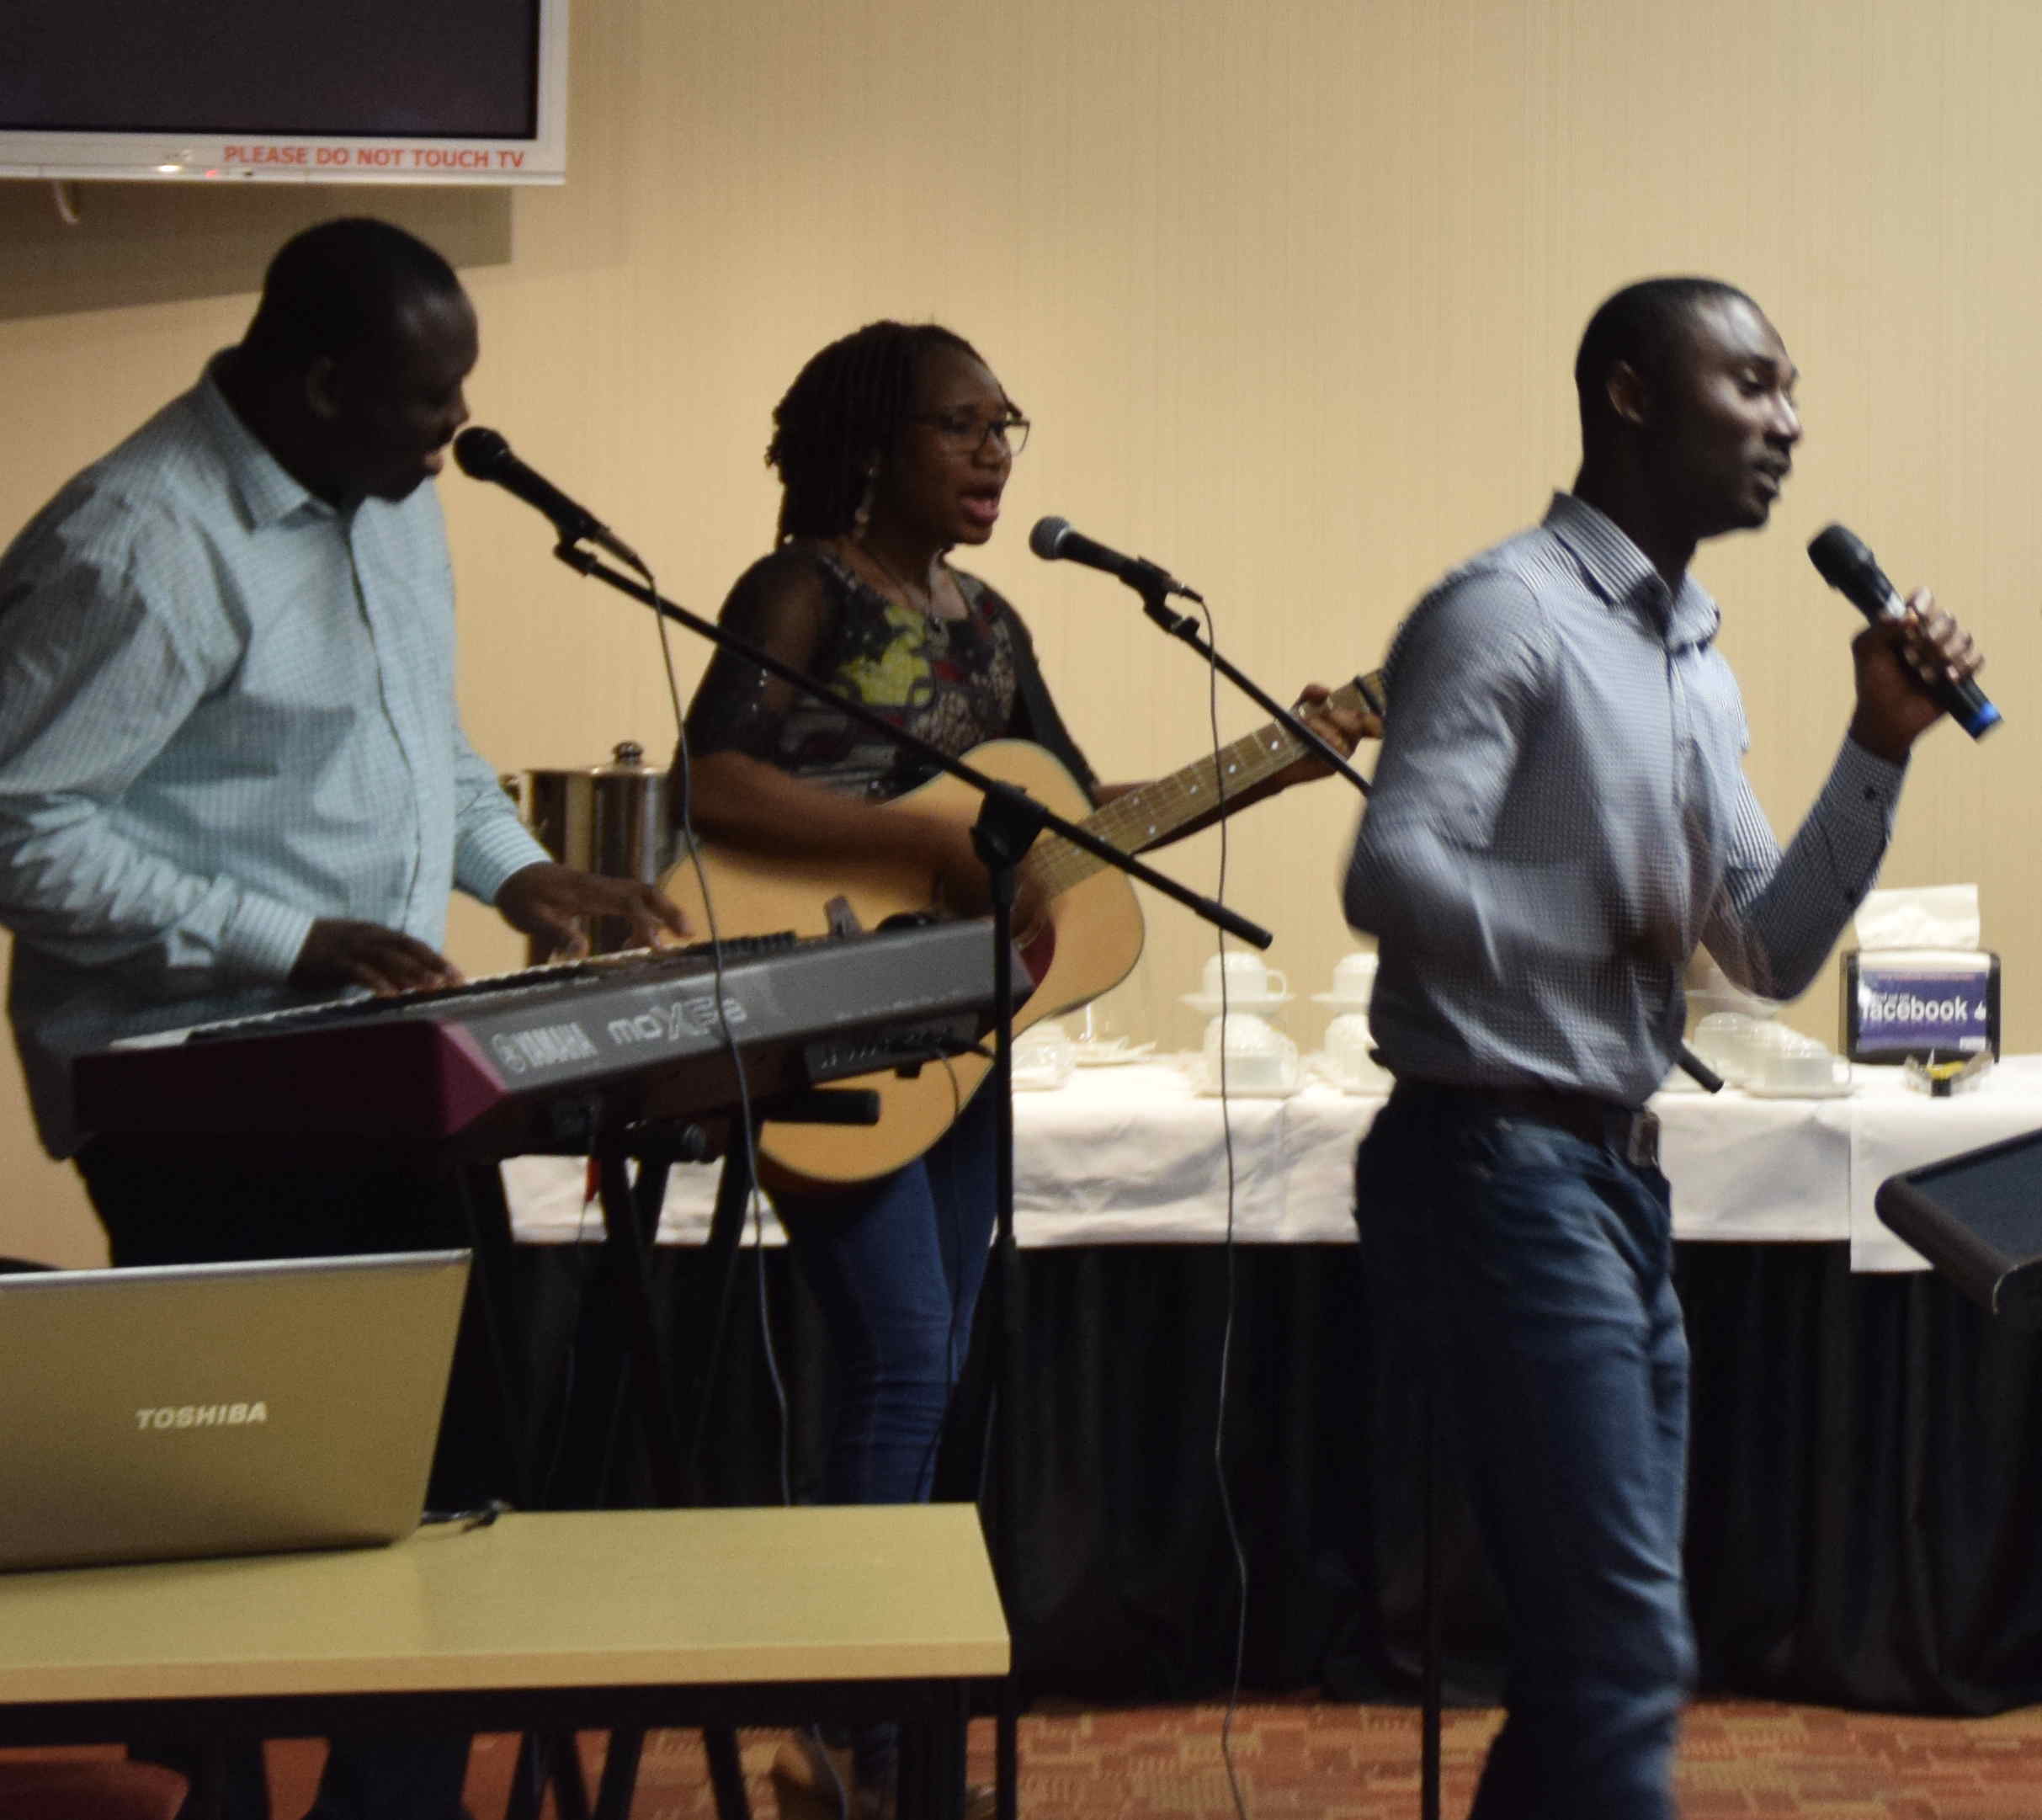  The gathering was entertained by Jumo, Jennifer and Sola playing some traditional West African music 